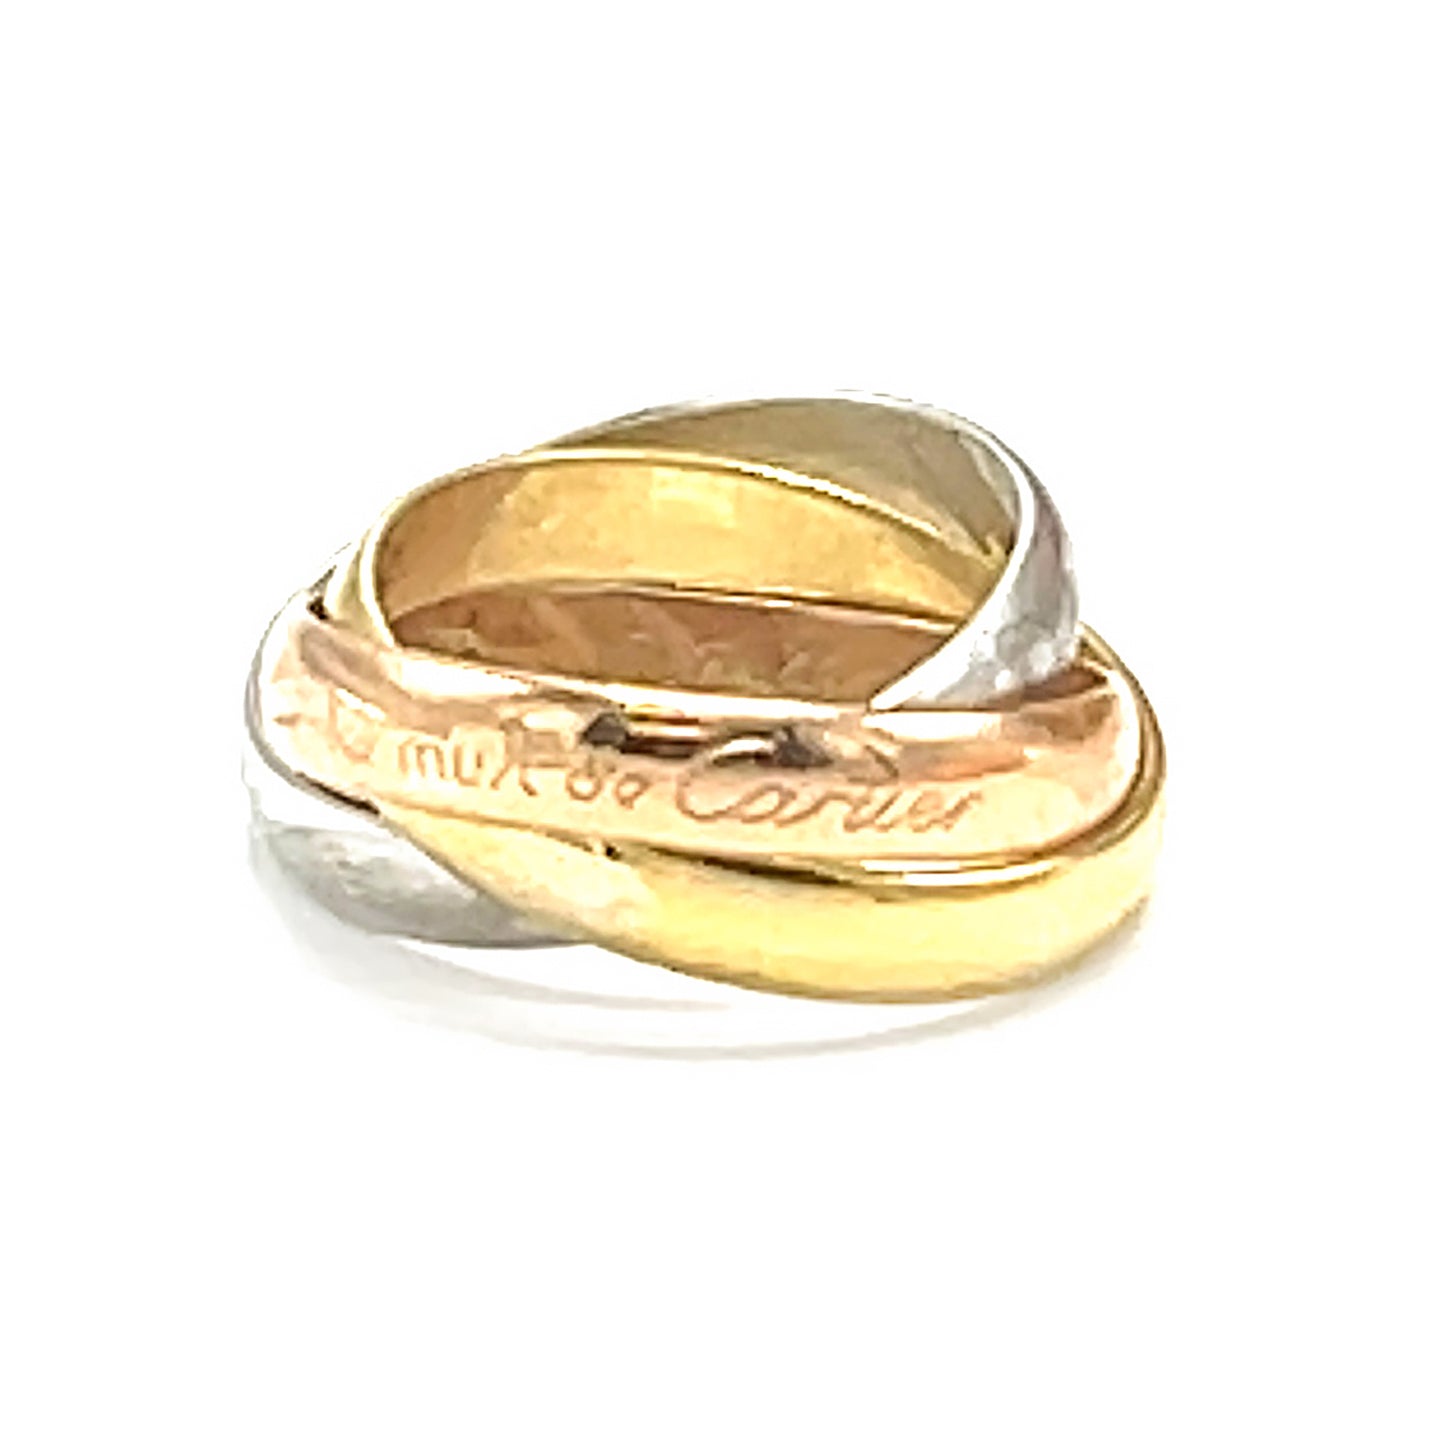 Load image into Gallery viewer, Pre-Owned Cartier Le Must de Cartier Trinity Ring in 18k Gold Size 3.75
